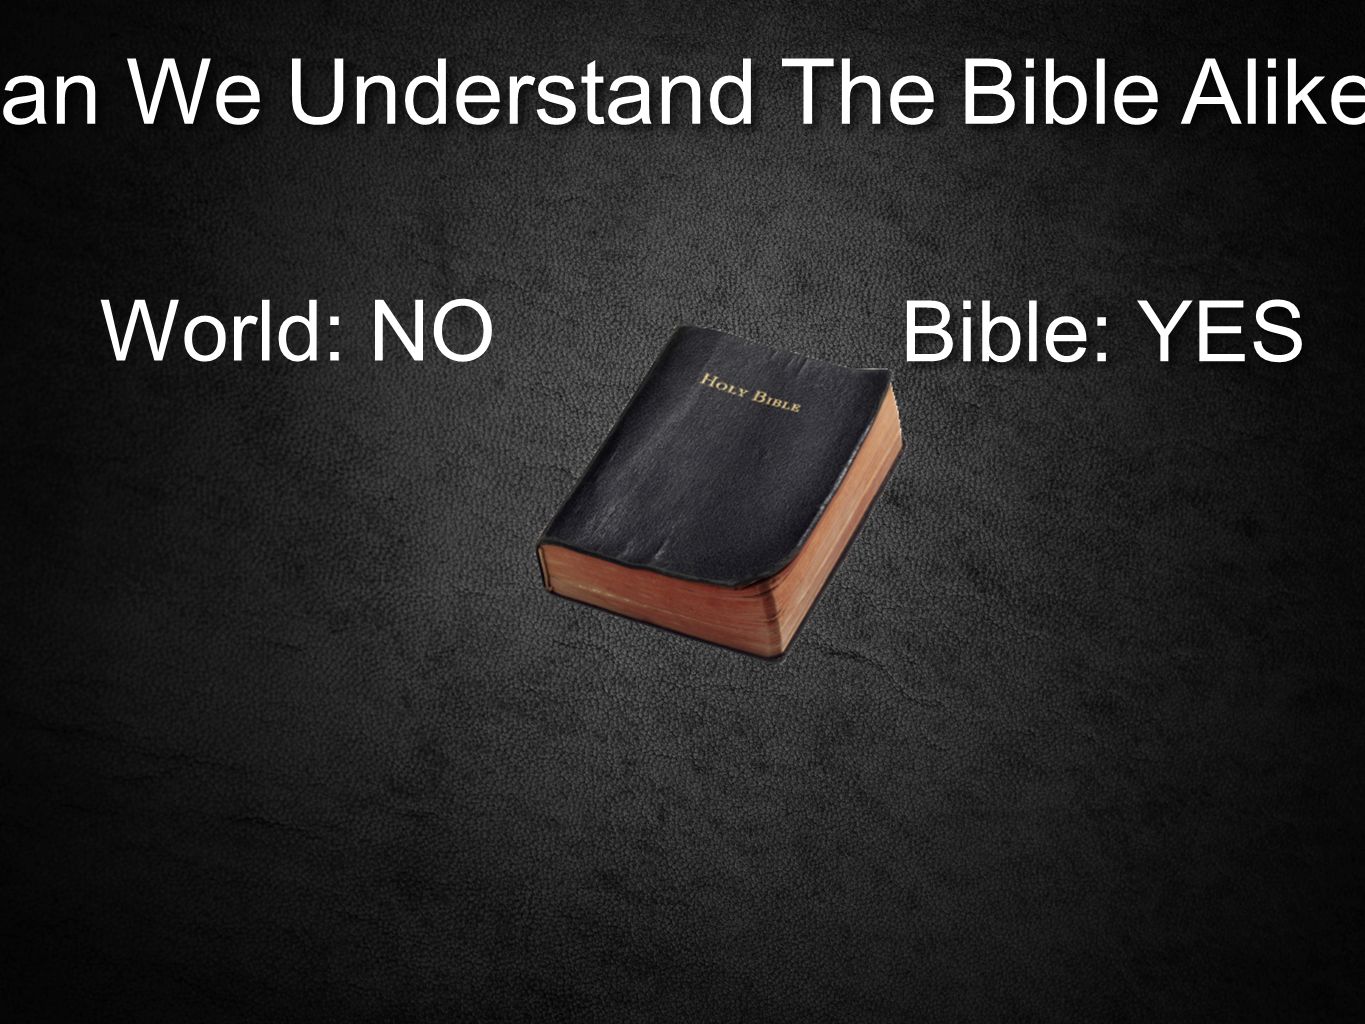 Can We Understand The Bible Alike World: NO Bible: YES